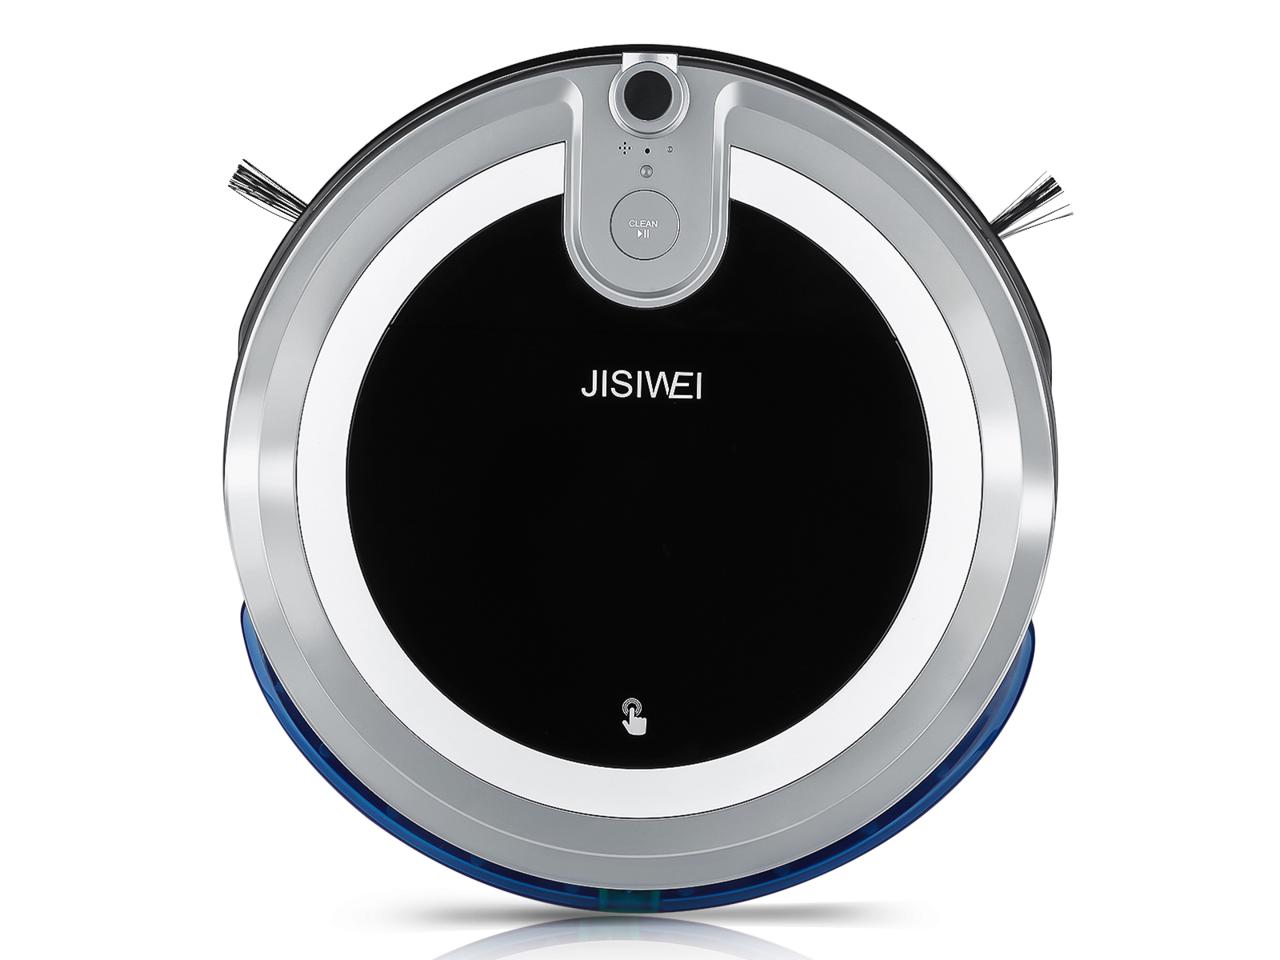 Jisiwei I3 Wi-Fi enabled robotic floor cleaner for $100, free shipping